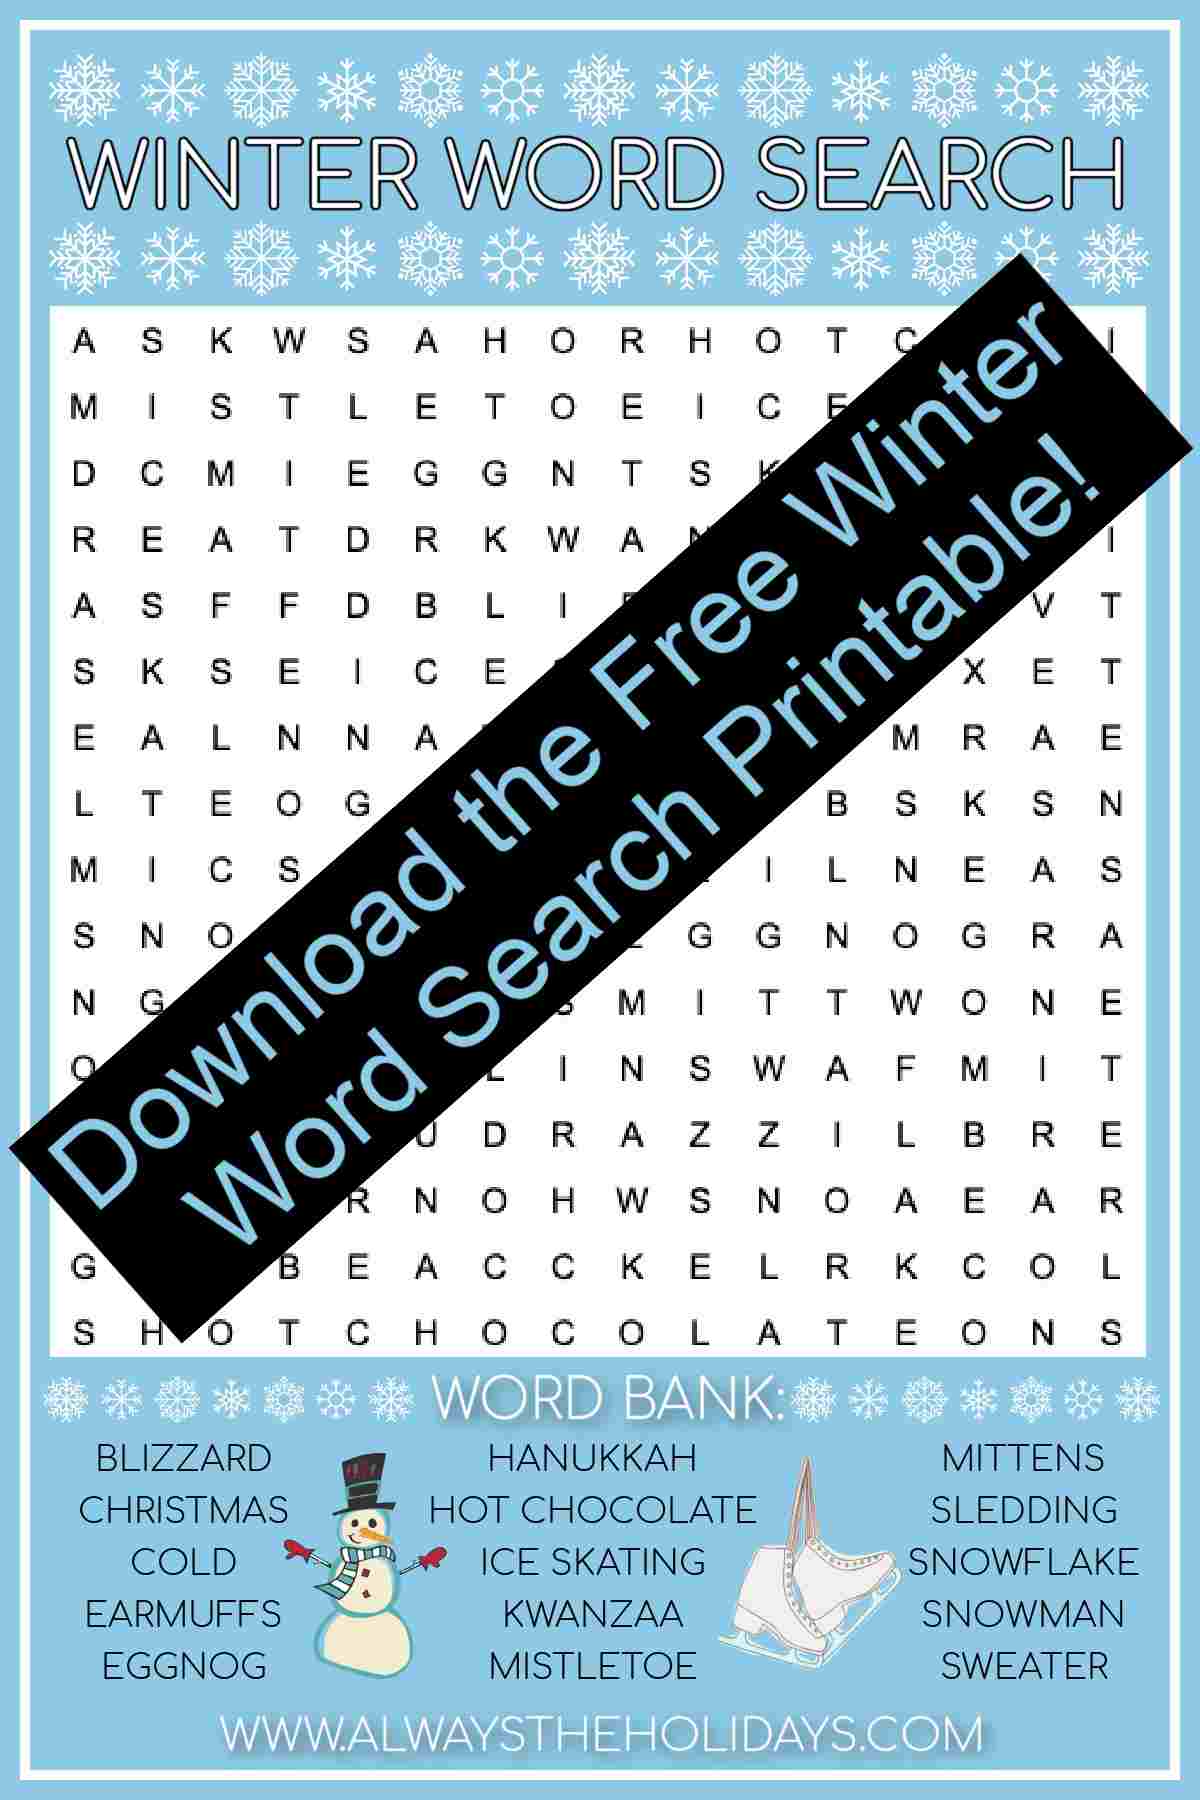 A free winter printable word search with a word bank at the bottom with a snowman graphic and ice skate graphic between the words and a banner across the center of the image.